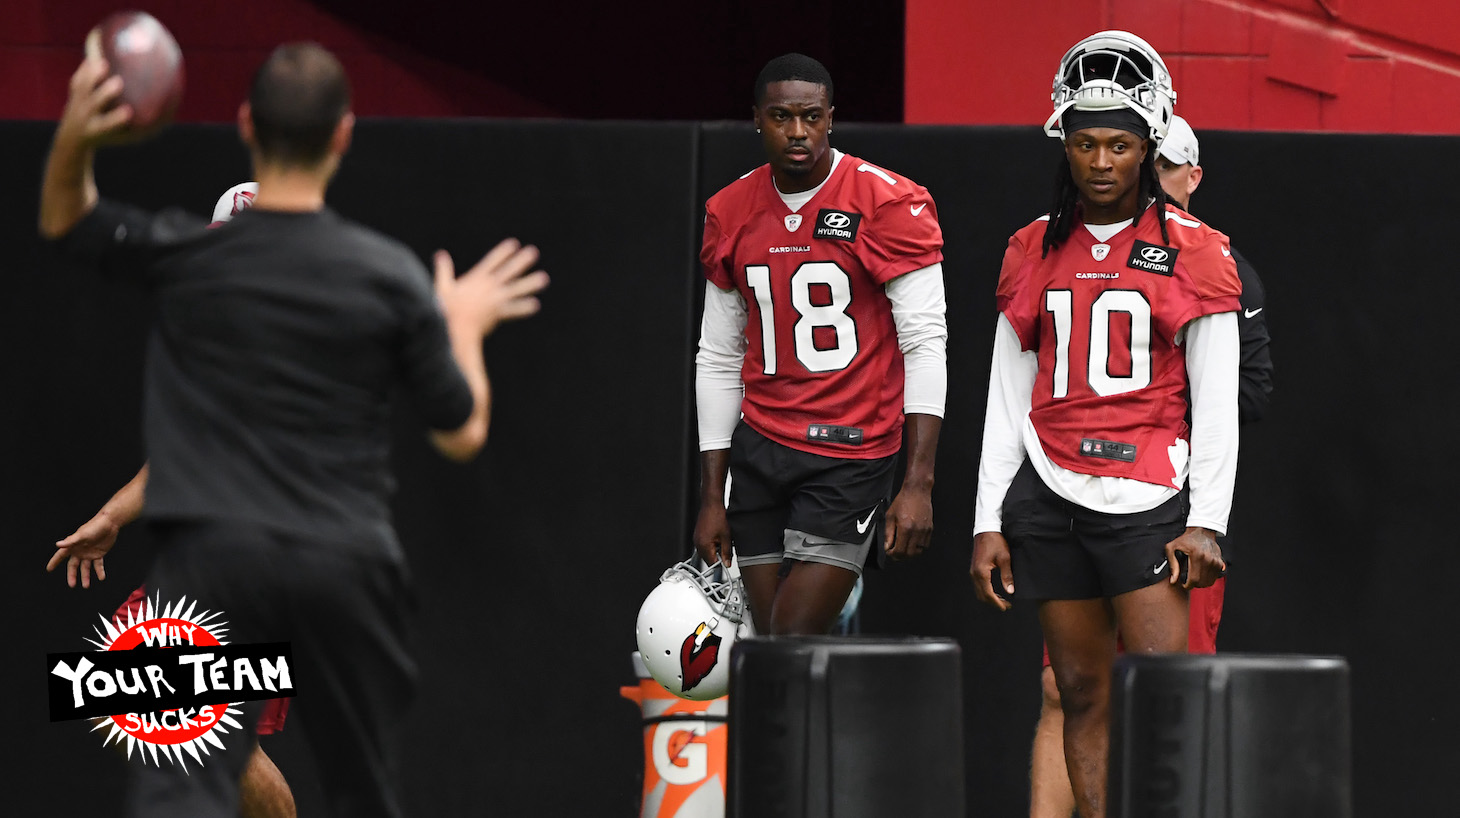 GLENDALE, ARIZONA - JULY 28: DeAndre Hopkins #10 and A.J. Green #18 of the Arizona Cardinals look on during passing drills at Training Camp at State Farm Stadium on July 28, 2021 in Glendale, Arizona. (Photo by Norm Hall/Getty Images)